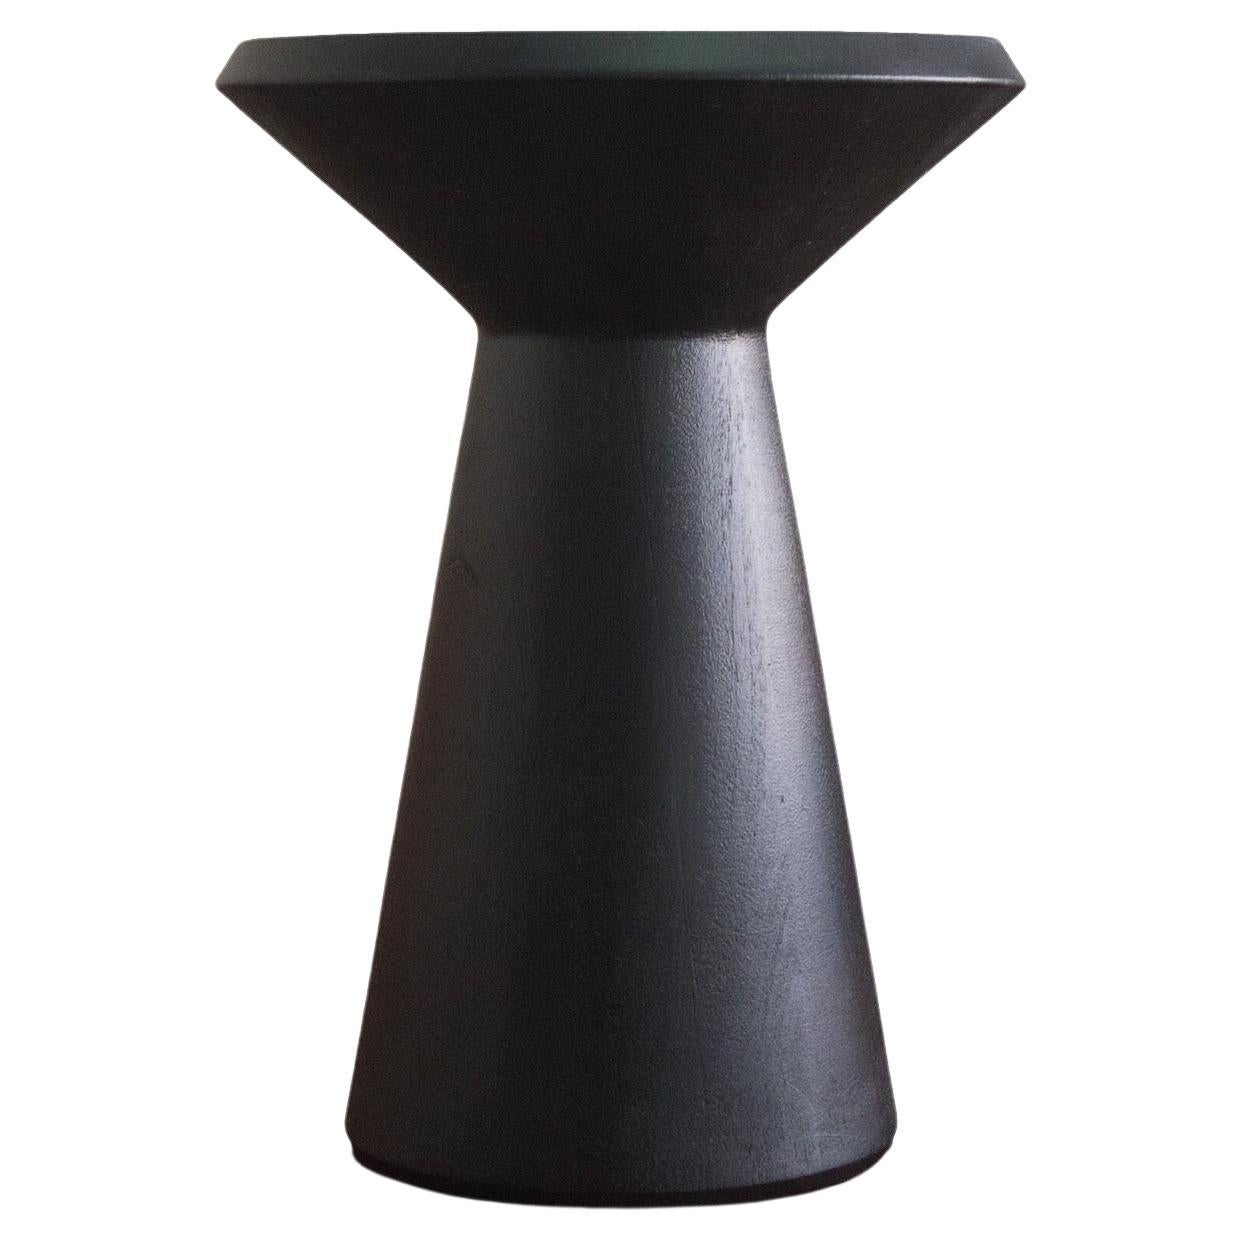 Contemporary Wooden Stool by CarmWorks, Black Wood